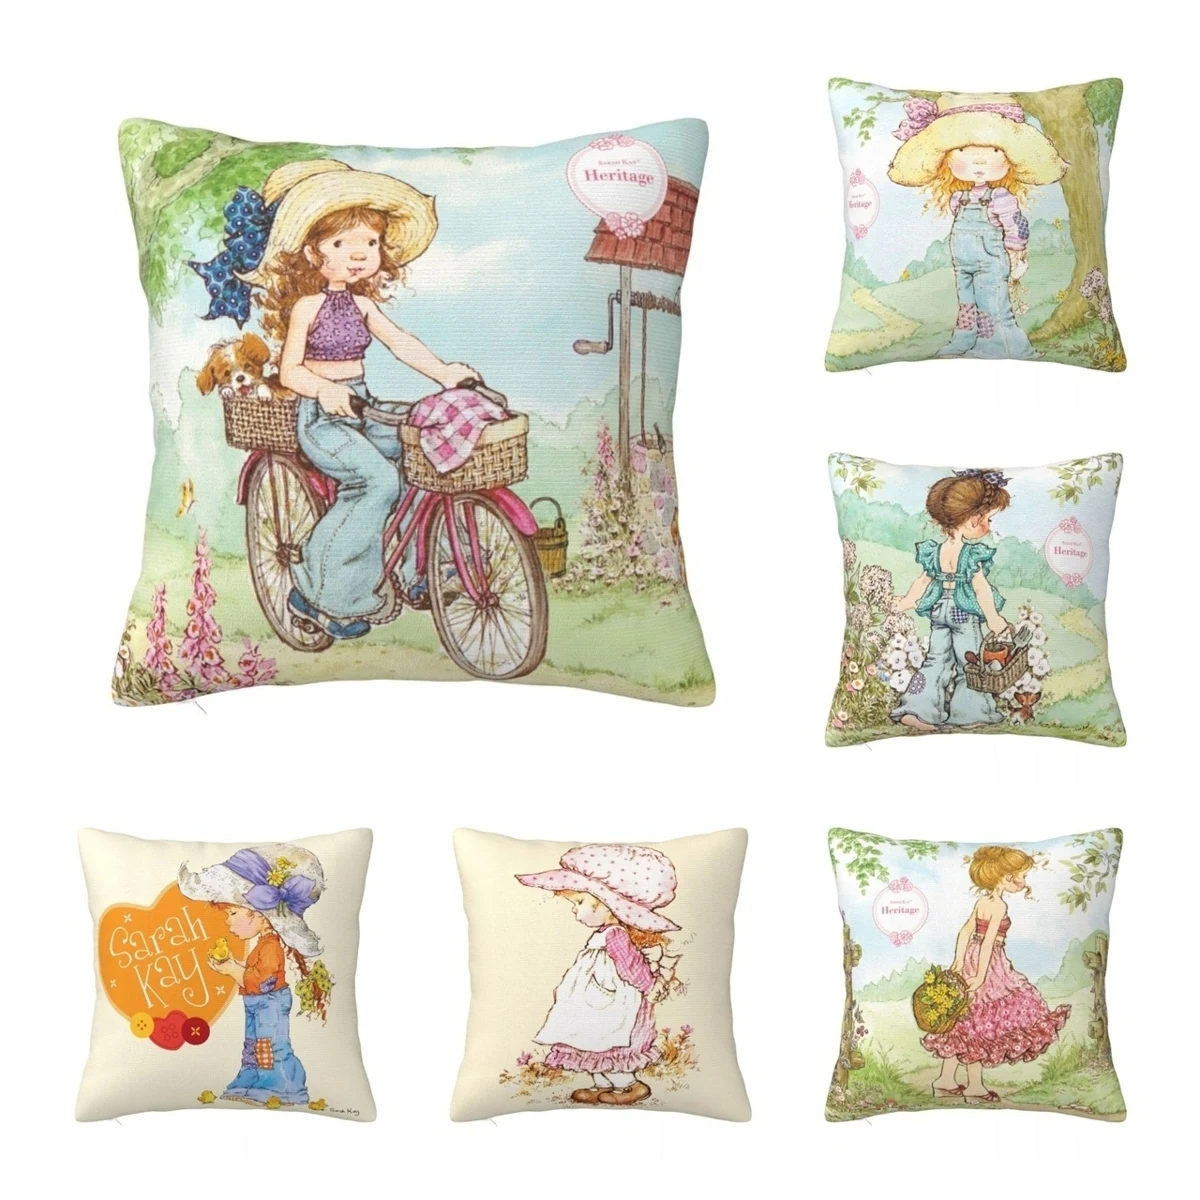 

Cute Sarah Kay Girl Pillowcase Accessories Printing Fabric Cushion Cover Decoration Cartoon Country Life Pillow Cover Multi-Size